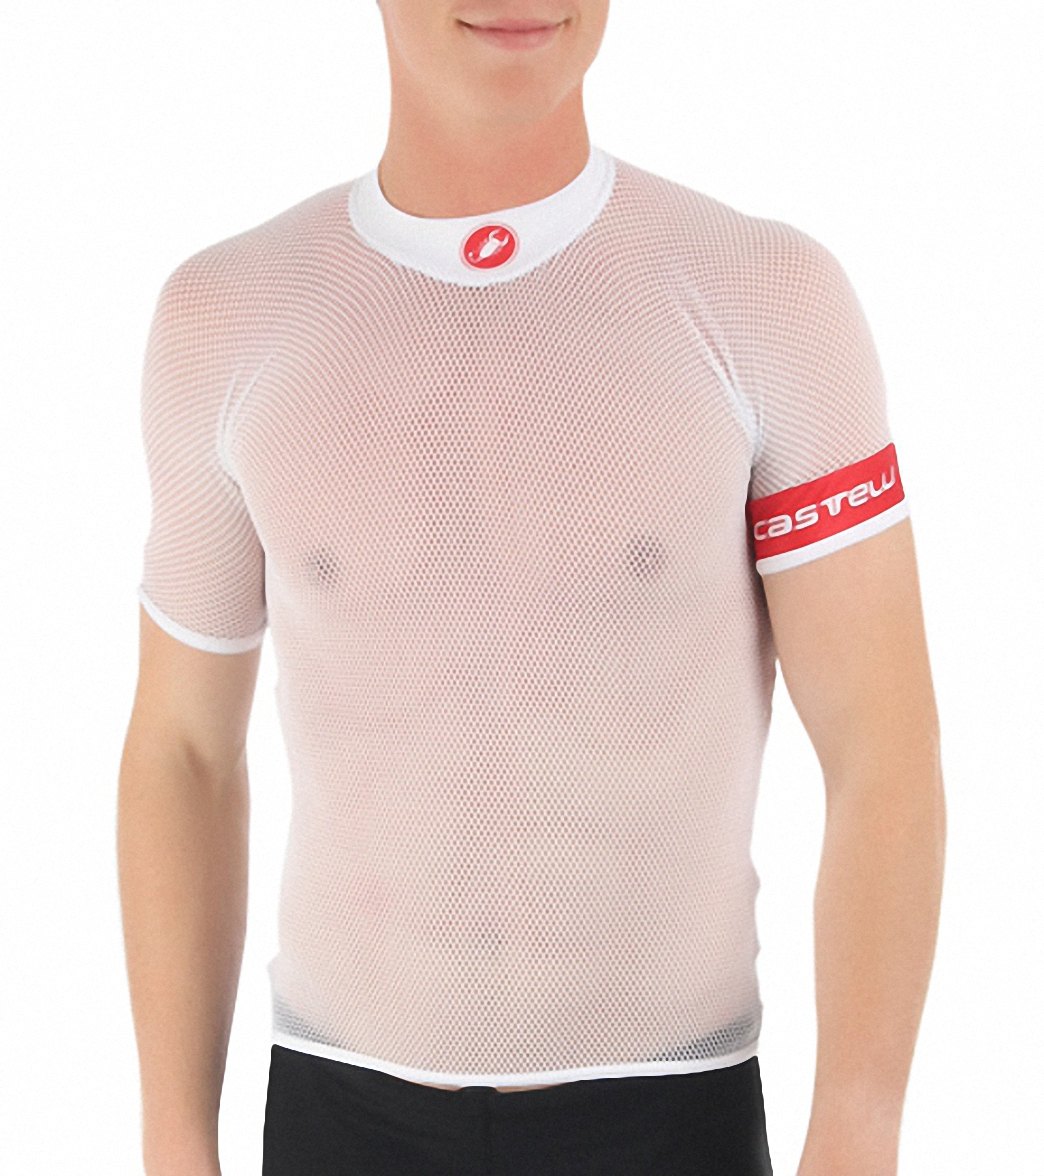 Castelli Mens Core Mesh Cycling Short Sleeve Base Layer At inside The Incredible as well as Beautiful cycling base layer benefits intended for House